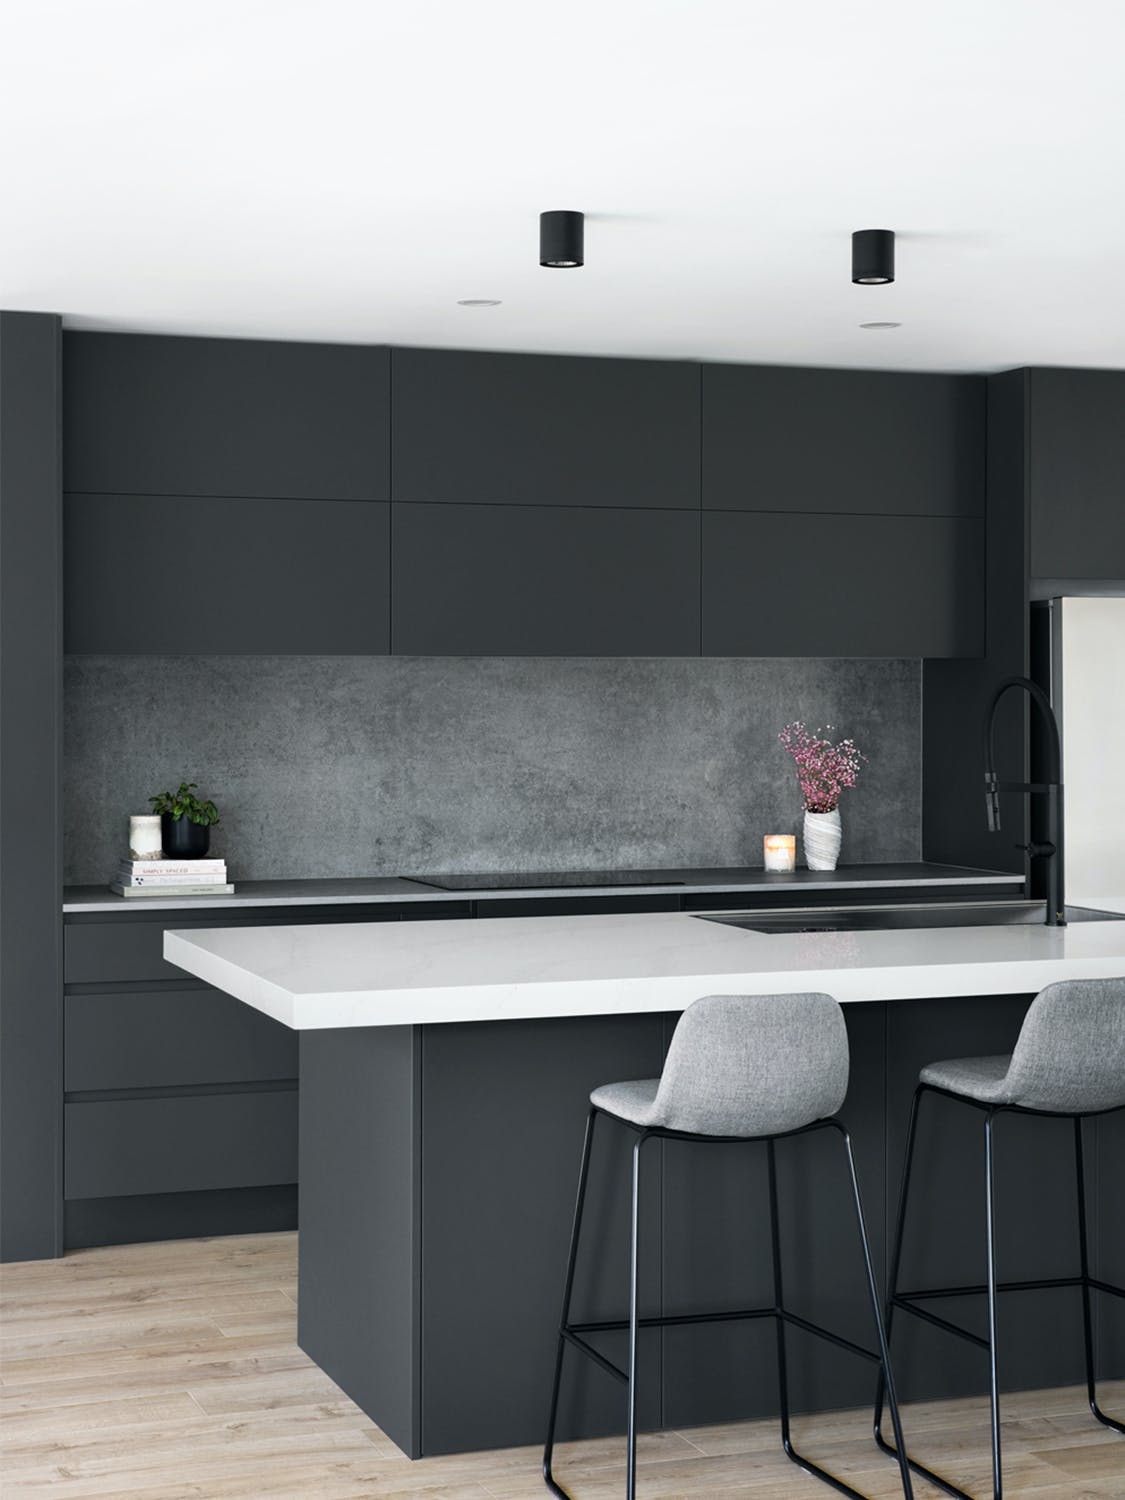 https://www.cosentino.com/2en-au/wp-content/uploads/2021/07/Cosentino_7-Tips-for-Designing-a-Modern-Kitchen_March_03-1.jpg